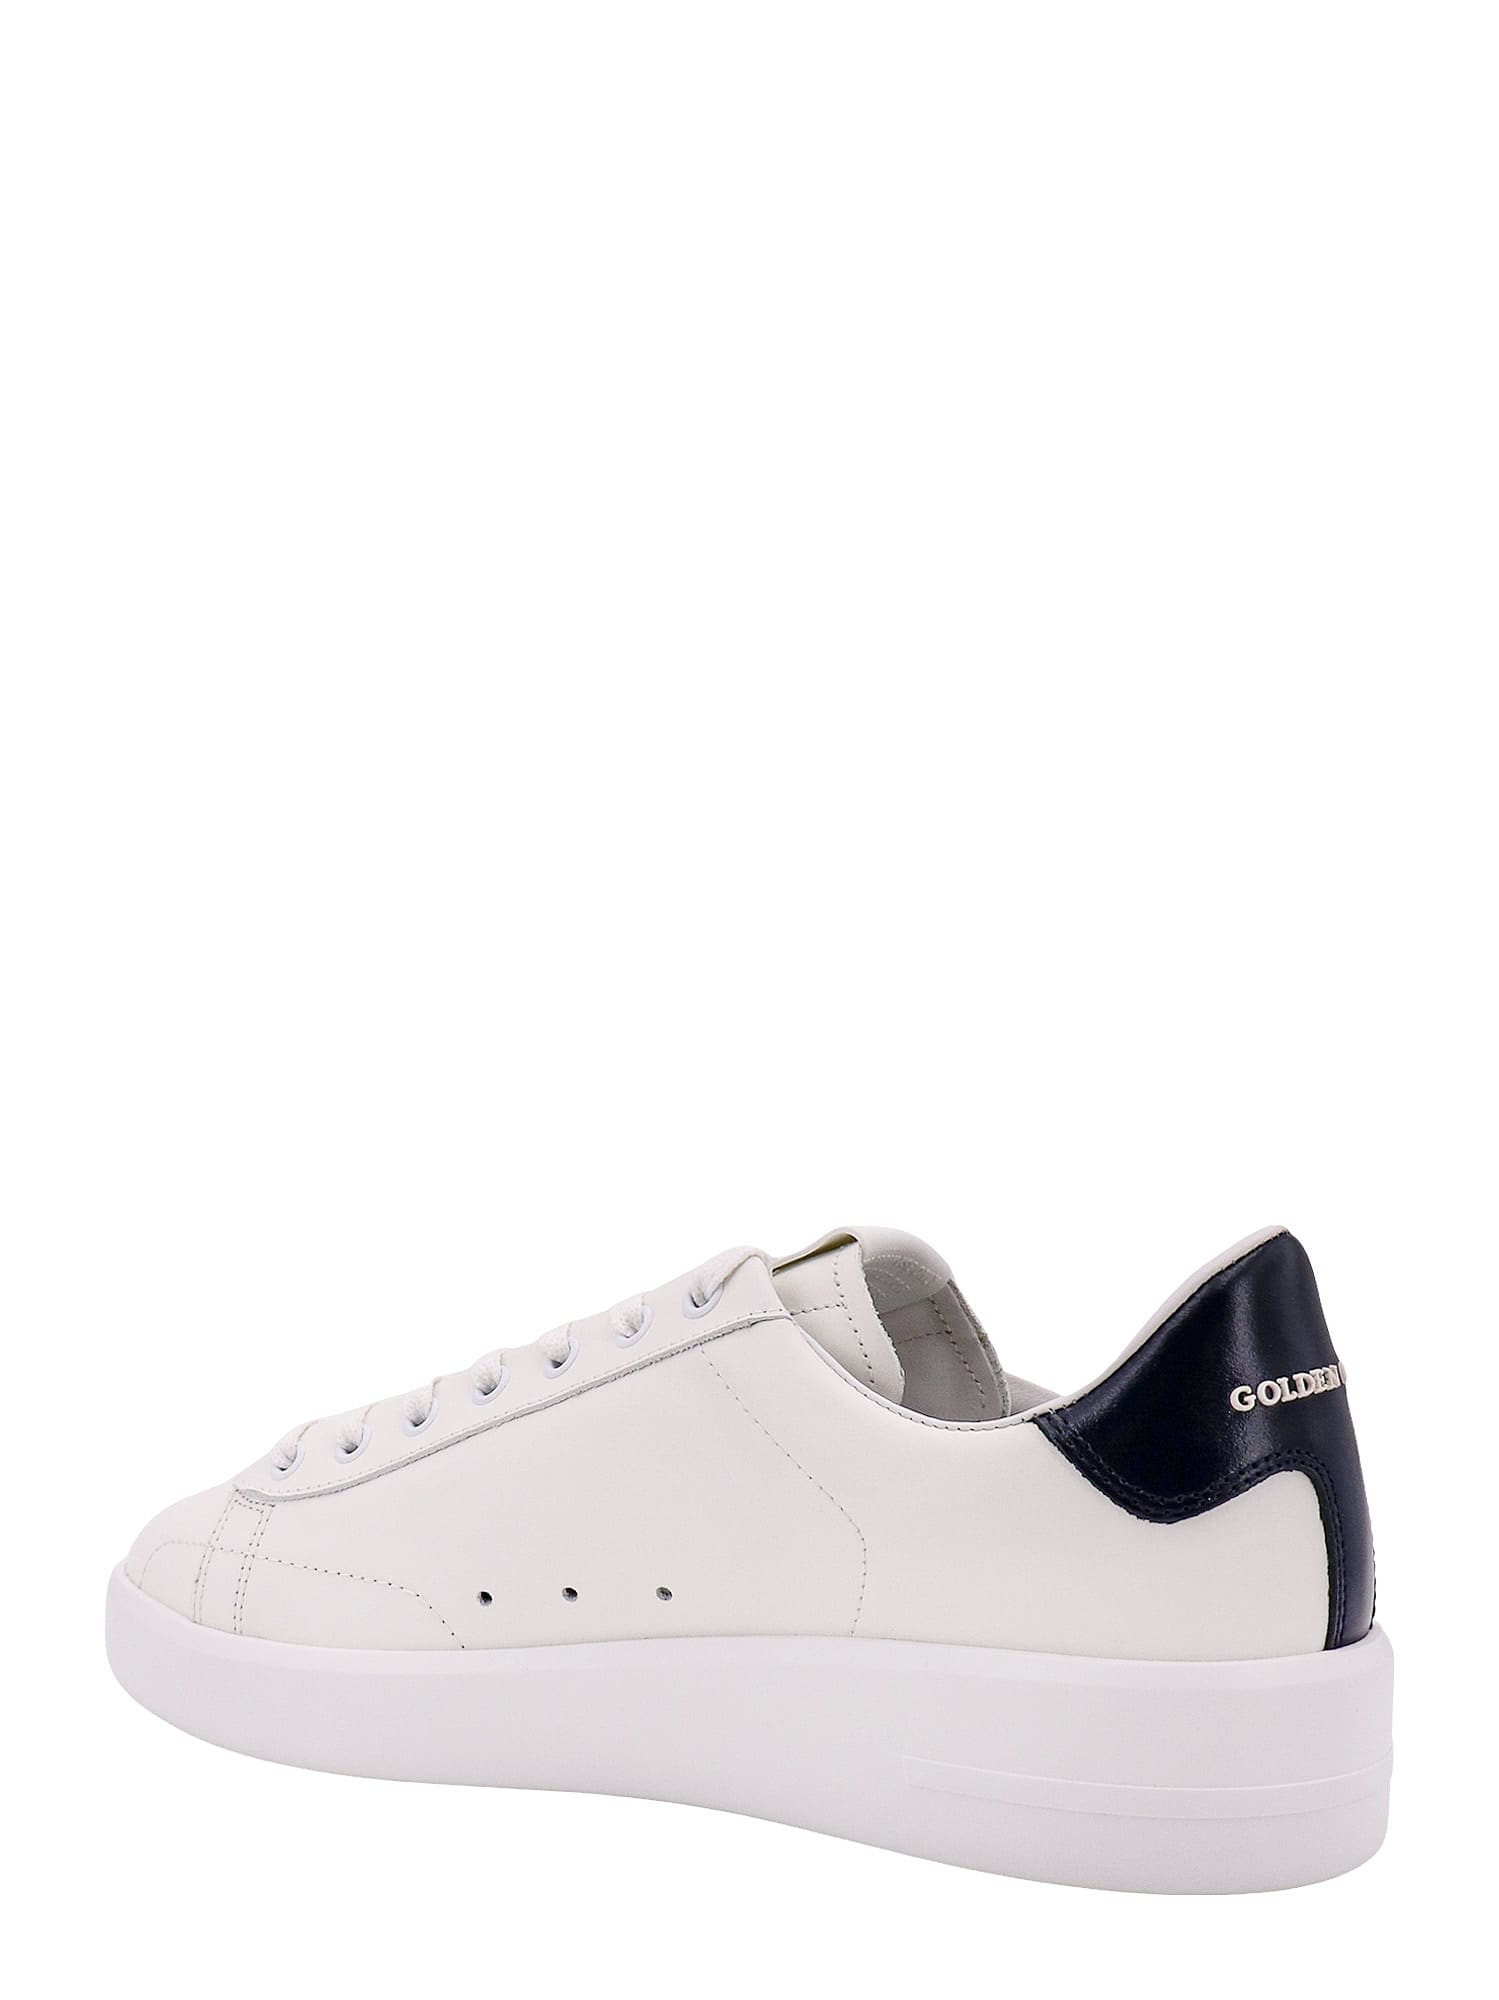 Shop Golden Goose Pure New Sneakers In White/blue